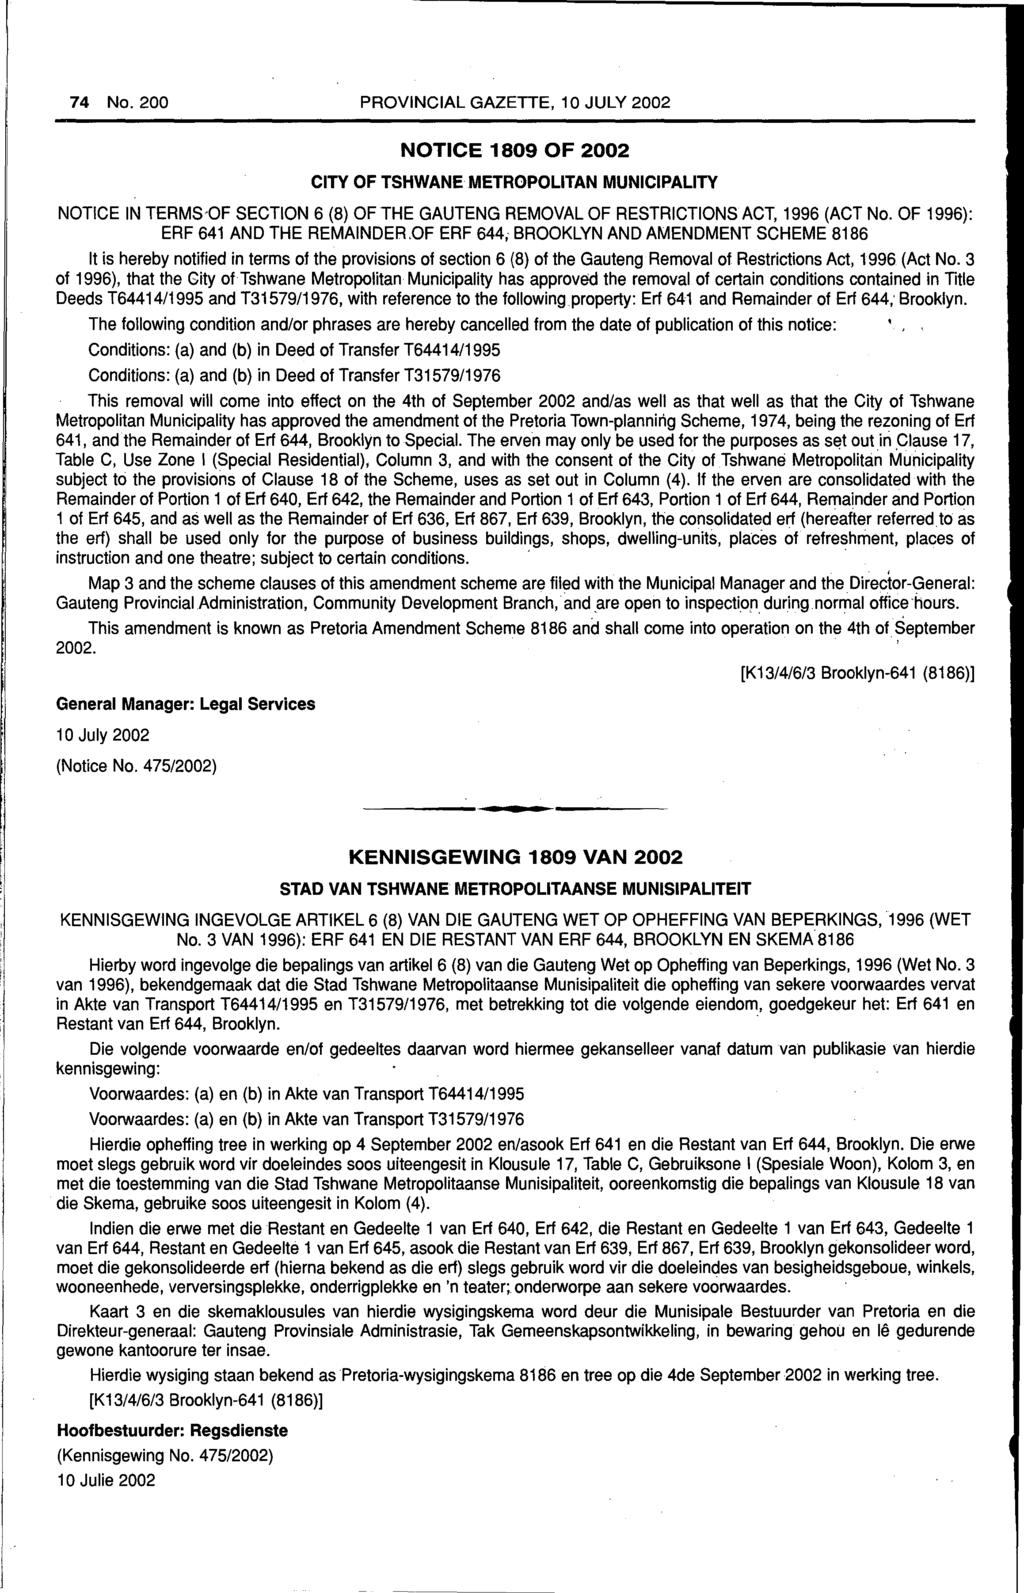 74 No.200 PROVINCIAL GAZETTE, 10 JULY 2002 NOTICE 1809 OF 2002 CITY OF TSHWANE.METROPOLITAN MUNICIPALITY NOTICE IN TERMS OF SECTION 6 (8} OF THE GAUTENG REMOVAL OF RESTRICTIONS ACT, 1996 (ACT No.